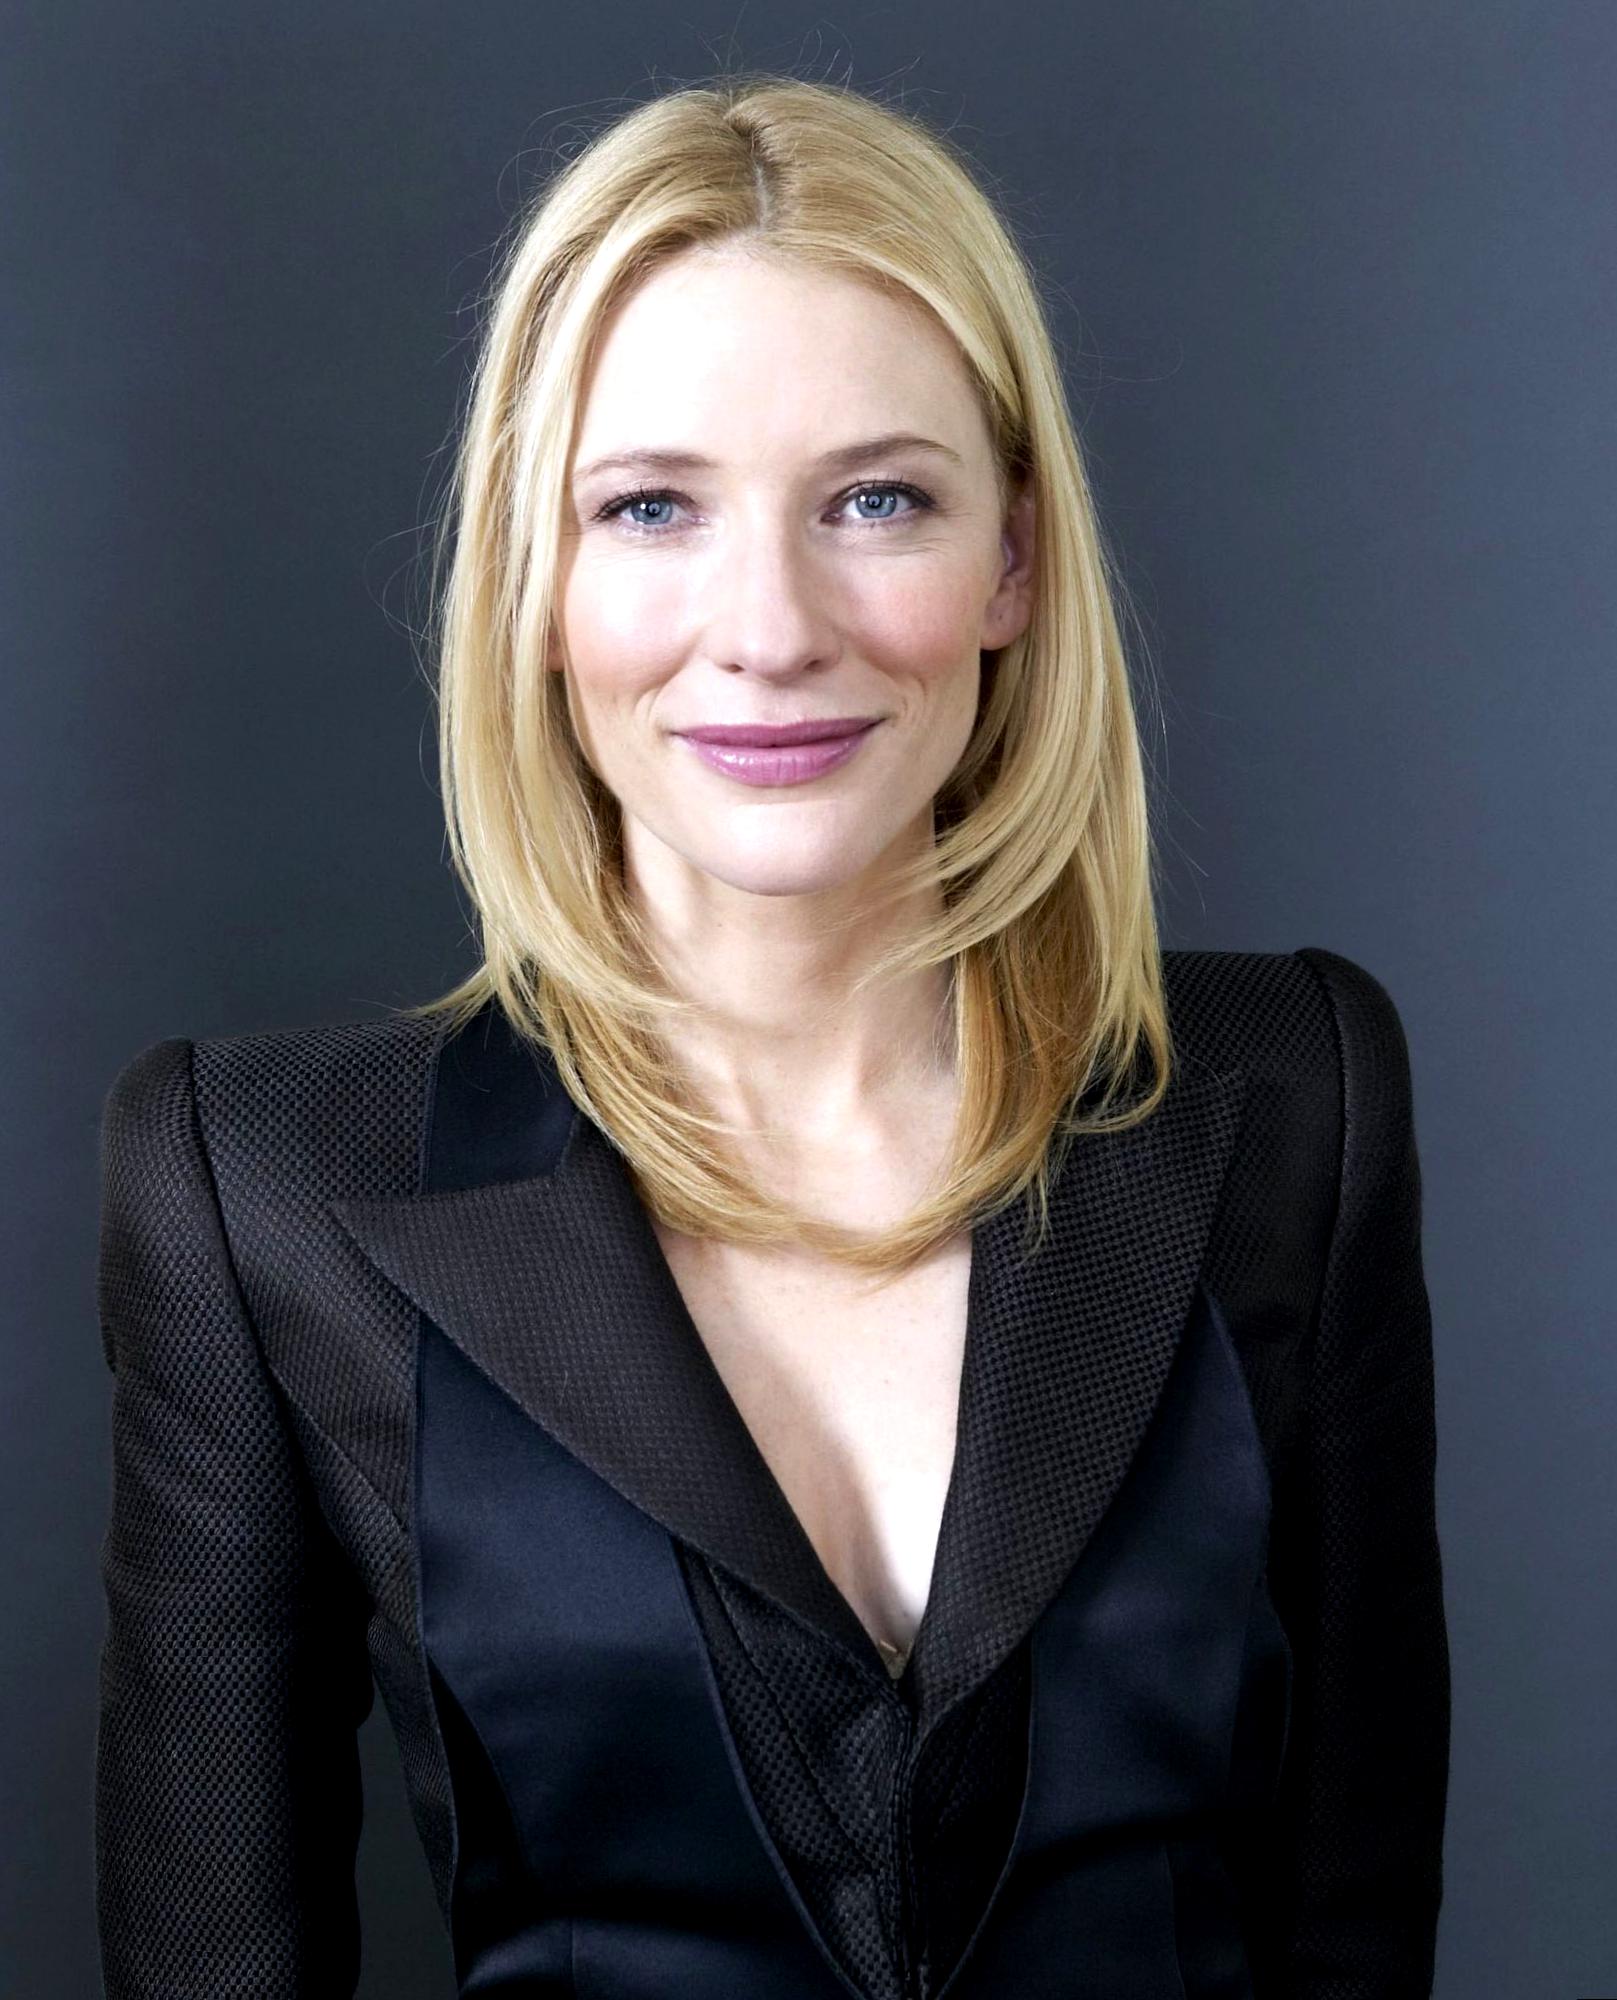 Cate Blanchett 702543 Wallpapers High Quality Download Free